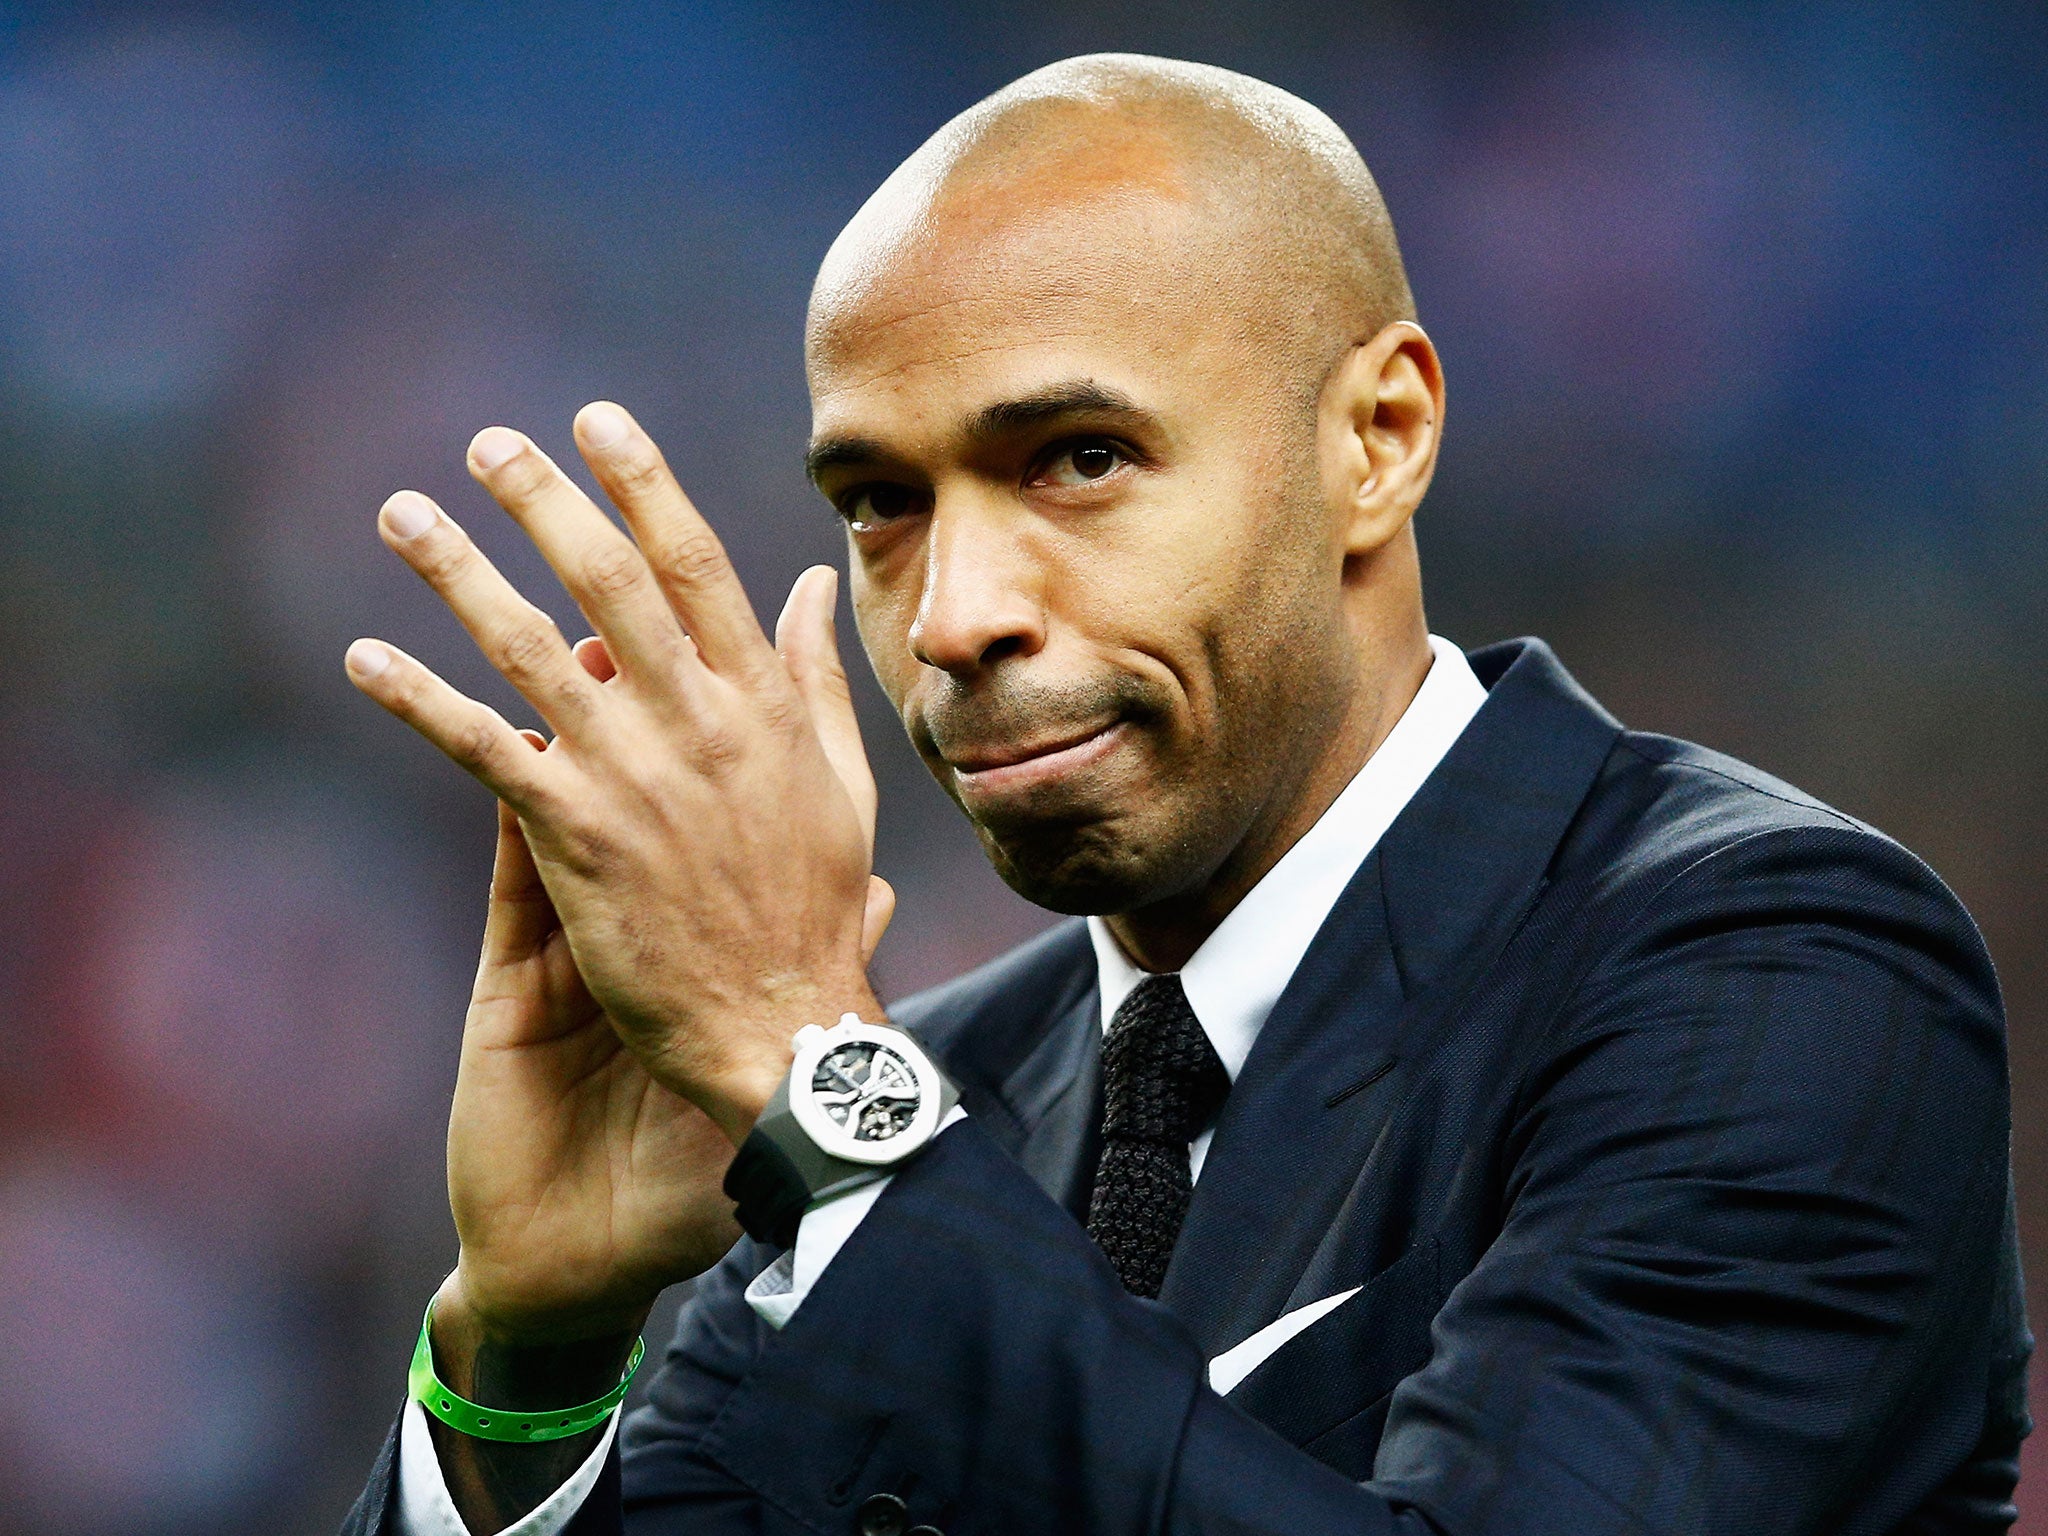 Thierry Henry Sky debut: how did the new pundit perform?